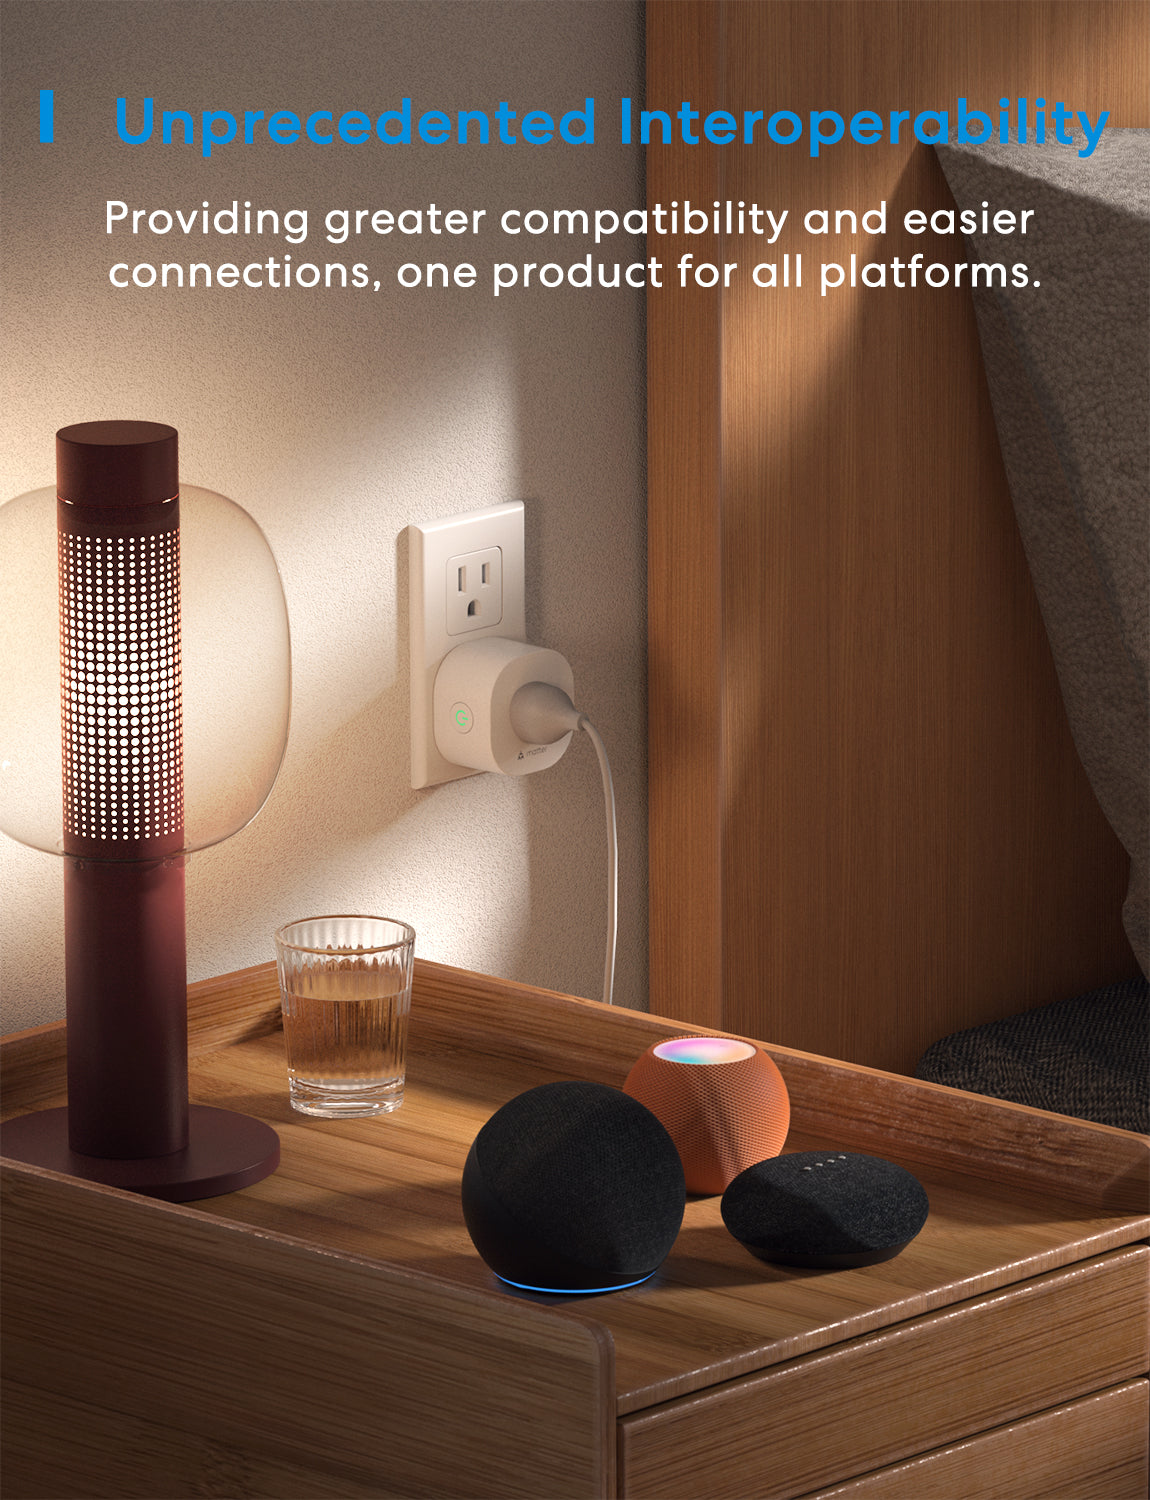 Shop all smart home products